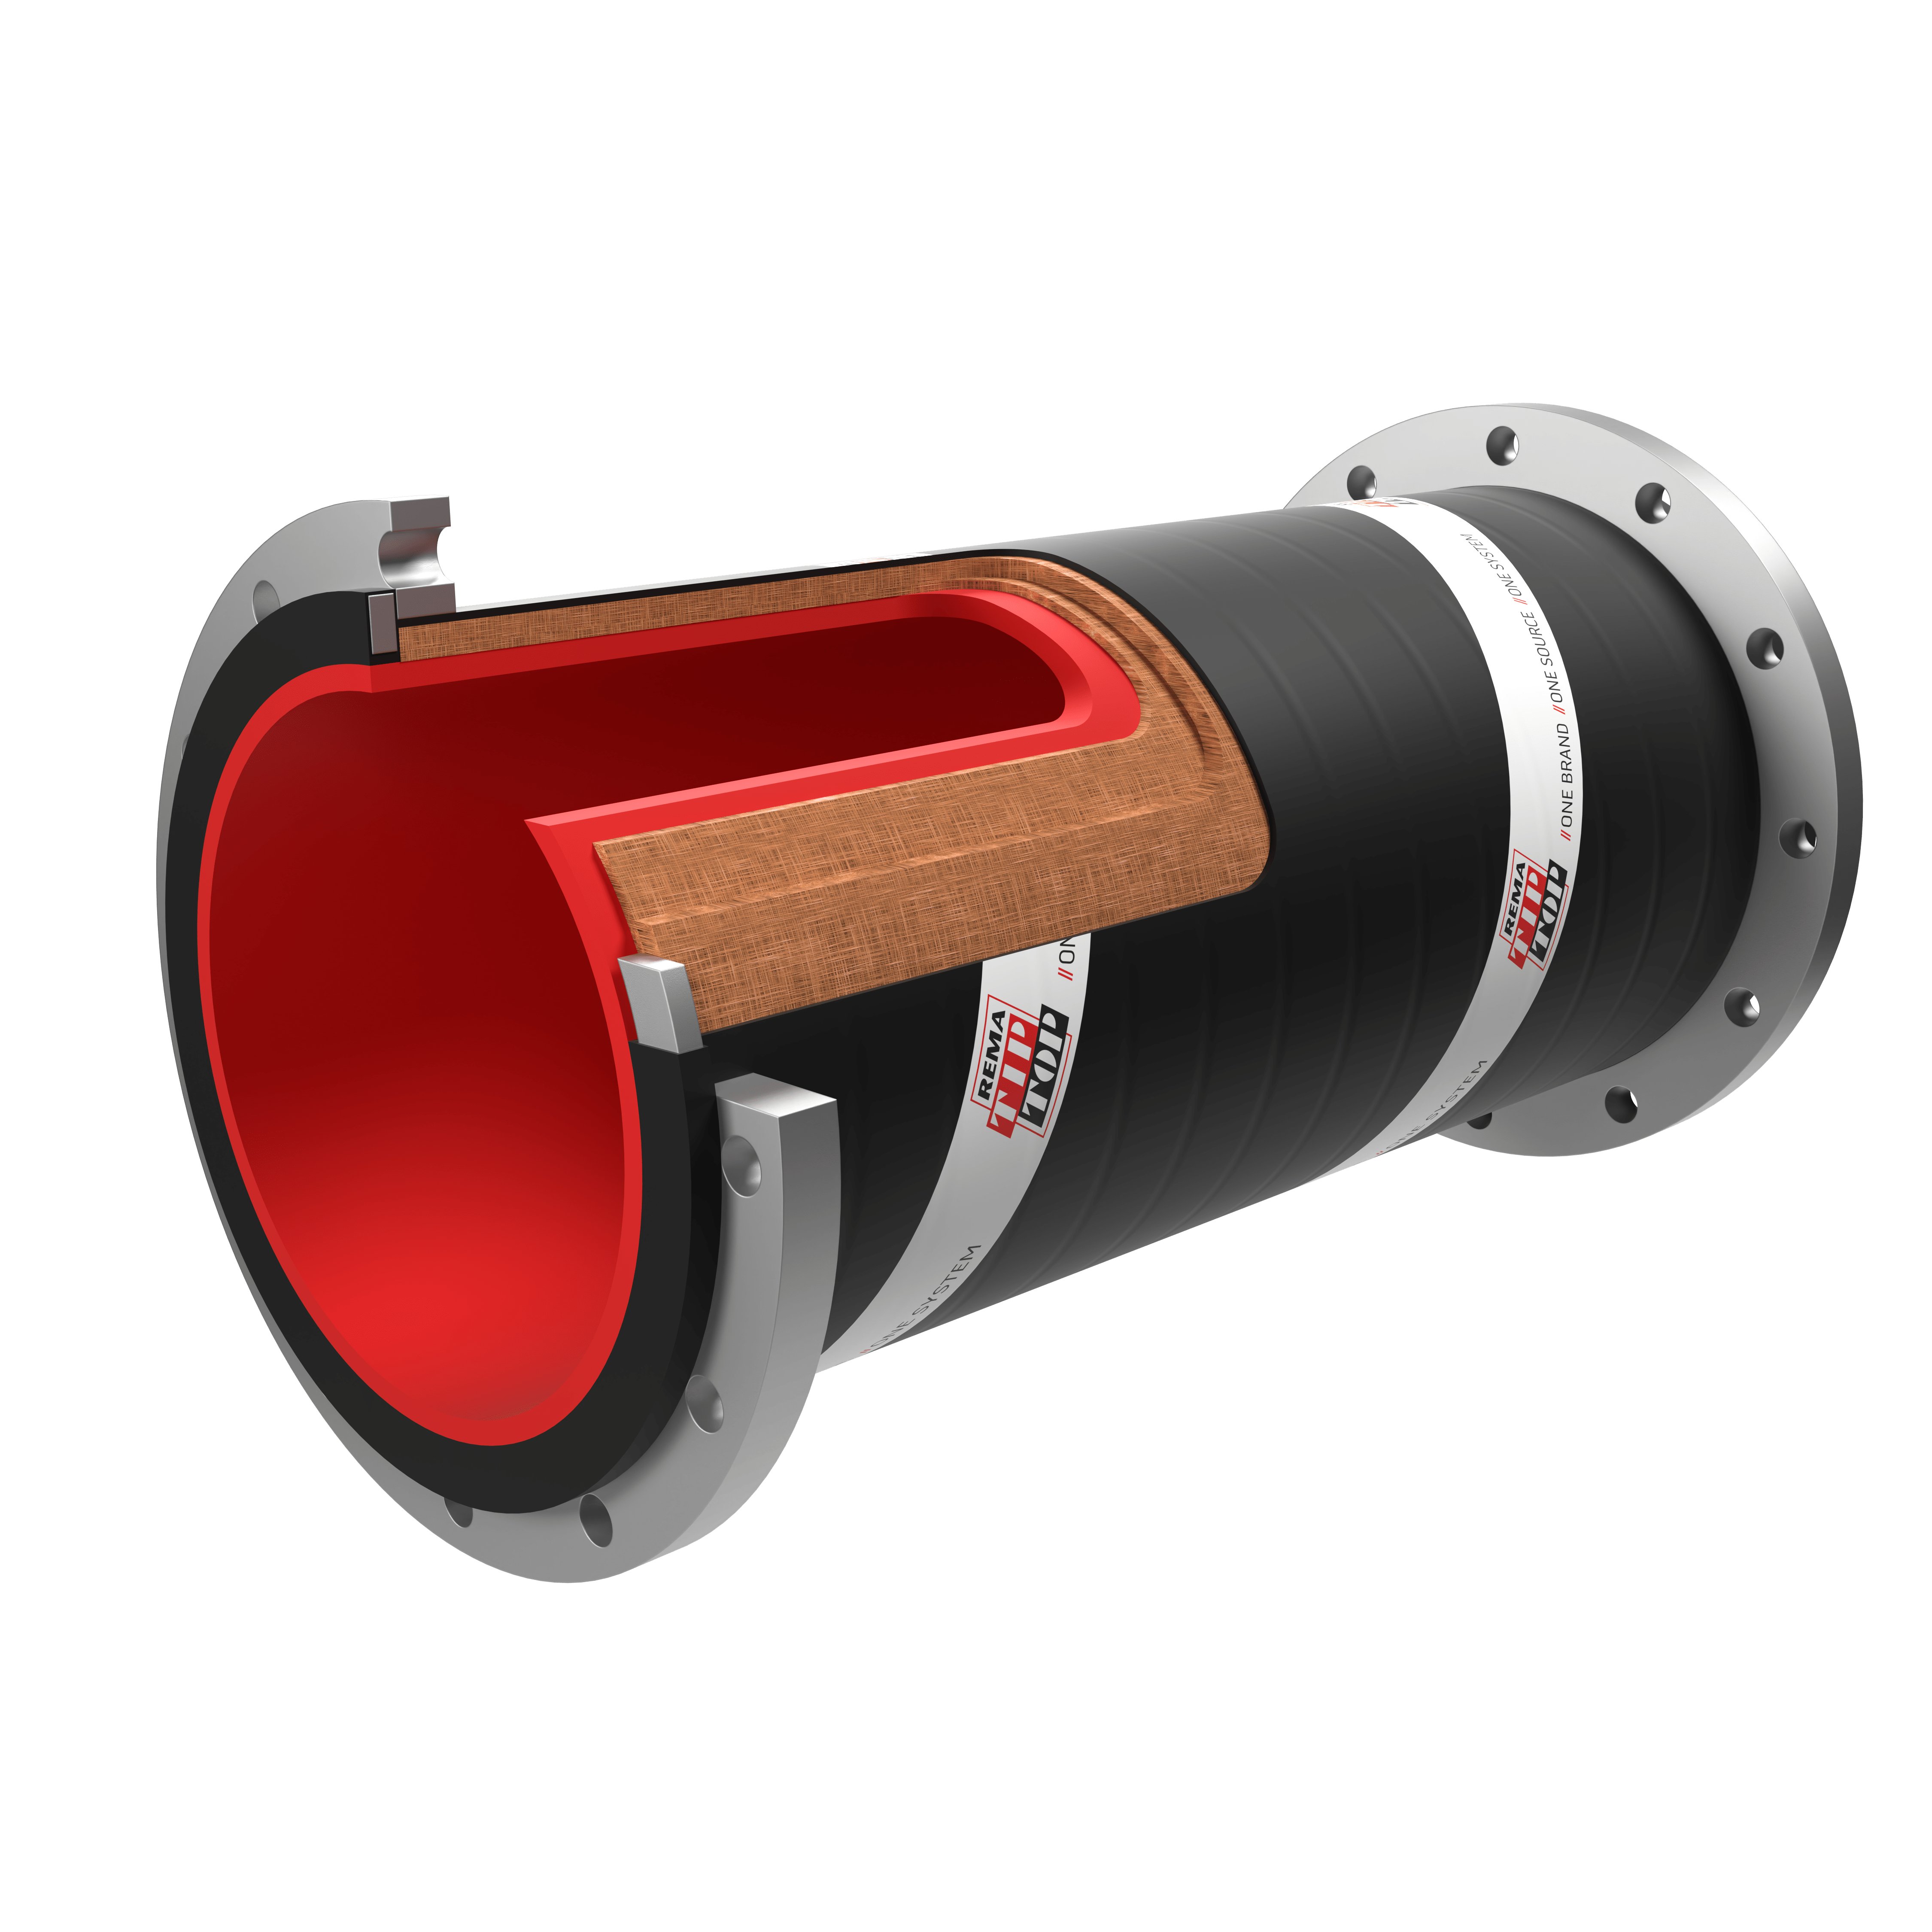 A cutaway view of a cylindrical industrial hose, resembling the REMATEX Hard-Wall Suction & Delivery Hose, with multiple layers revealing its internal structure. The outer layer is black, followed by a tan and red interior. The pipe has metallic flanges at both ends.